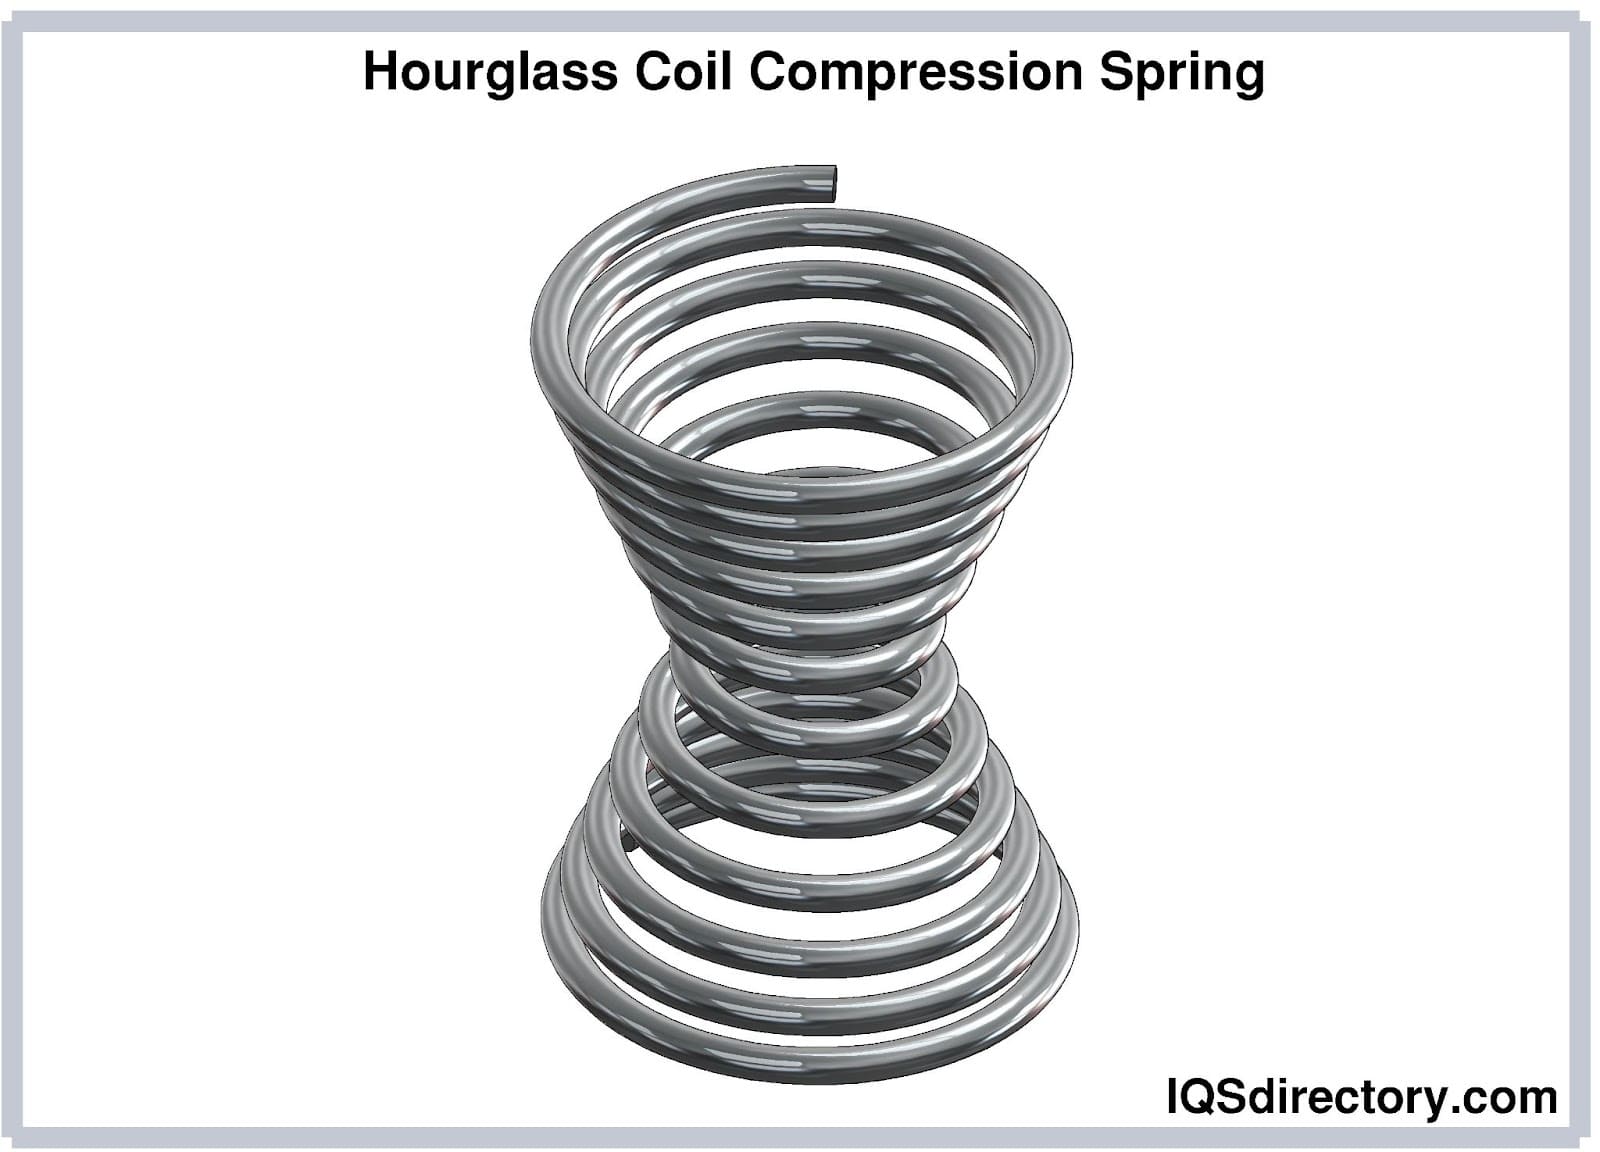 Hourglass Coil Compression Spring